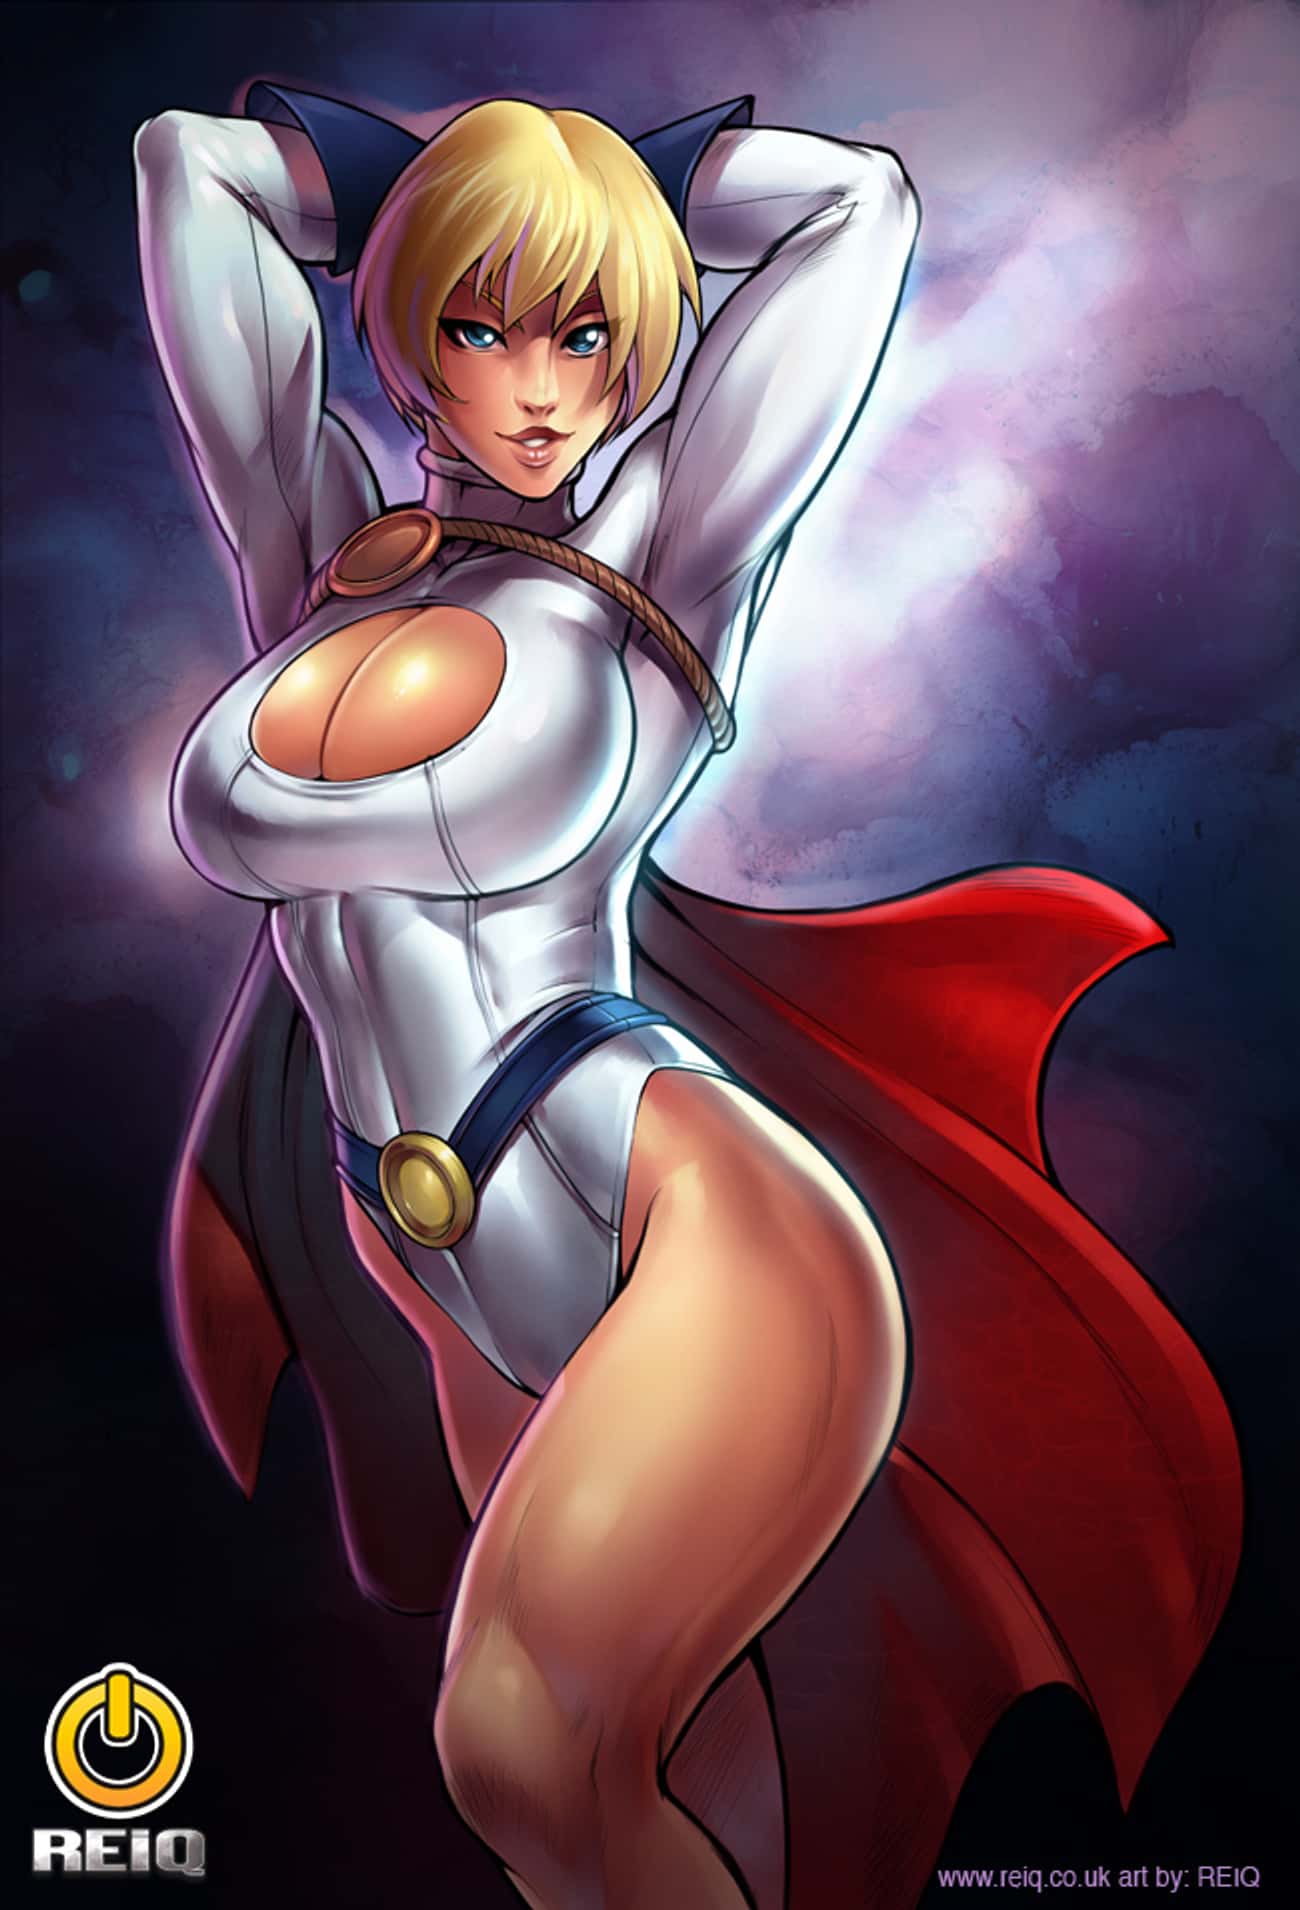 Power Girl in Under V-Cut White Outfit